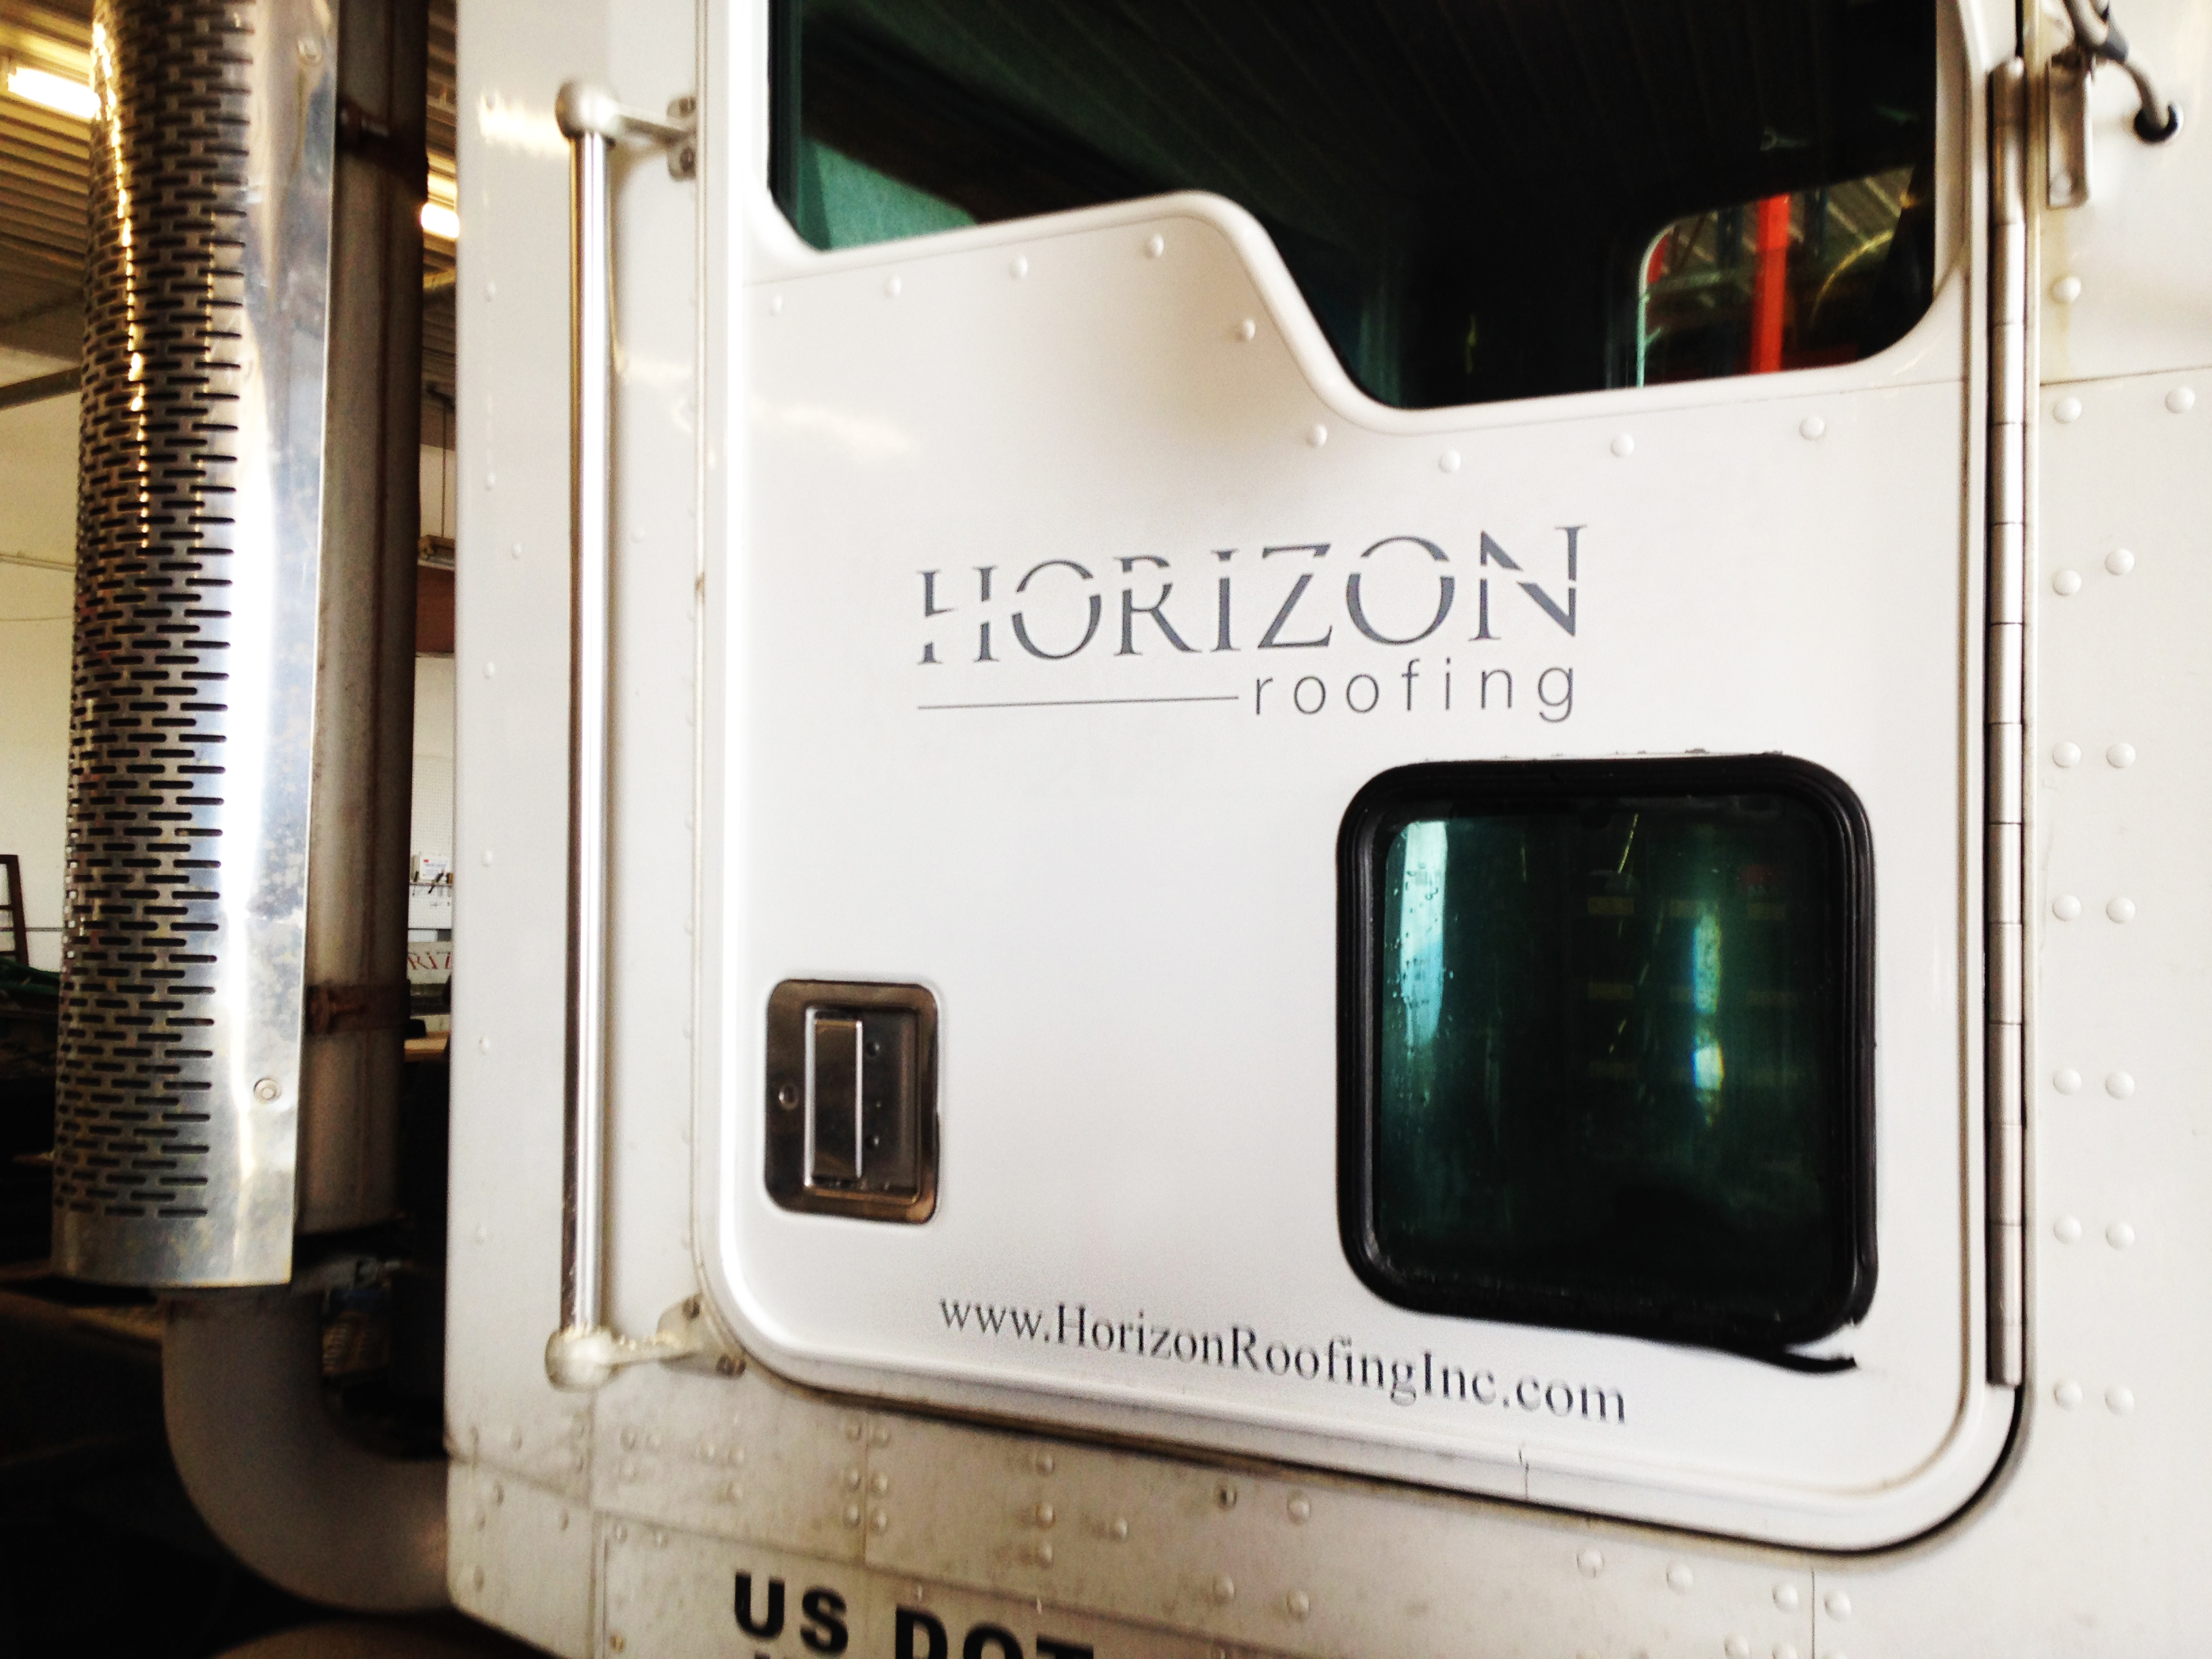 Custom Signs for Horizon Roofing | Signmax.com